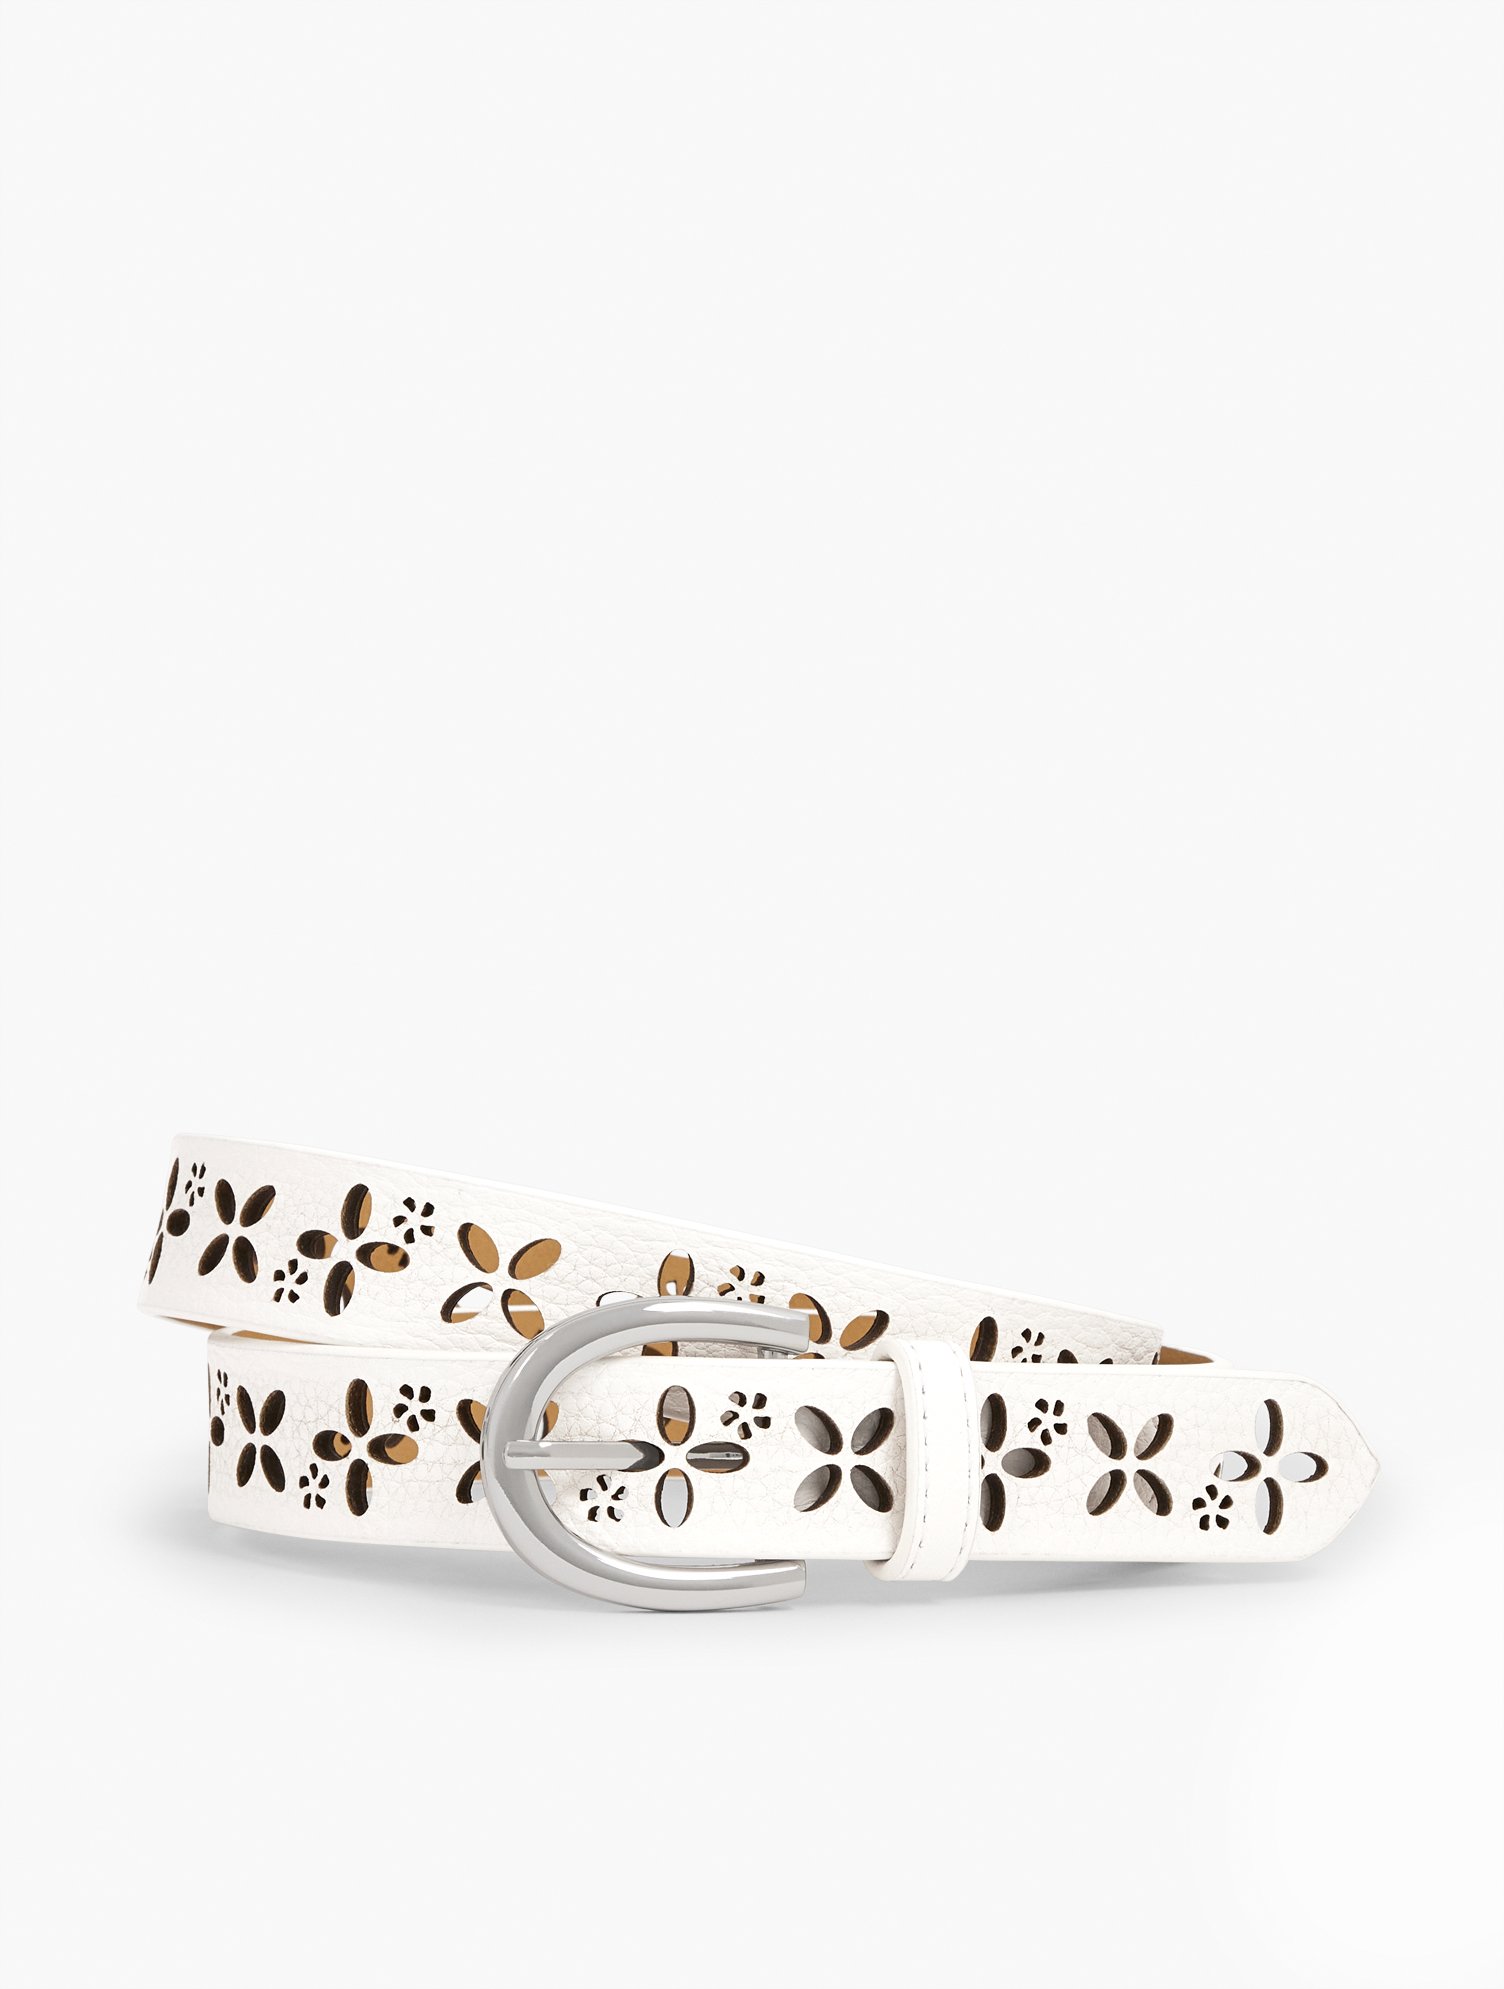 Talbots Perforated Floral Eyelet Leather Belt - White - Xl